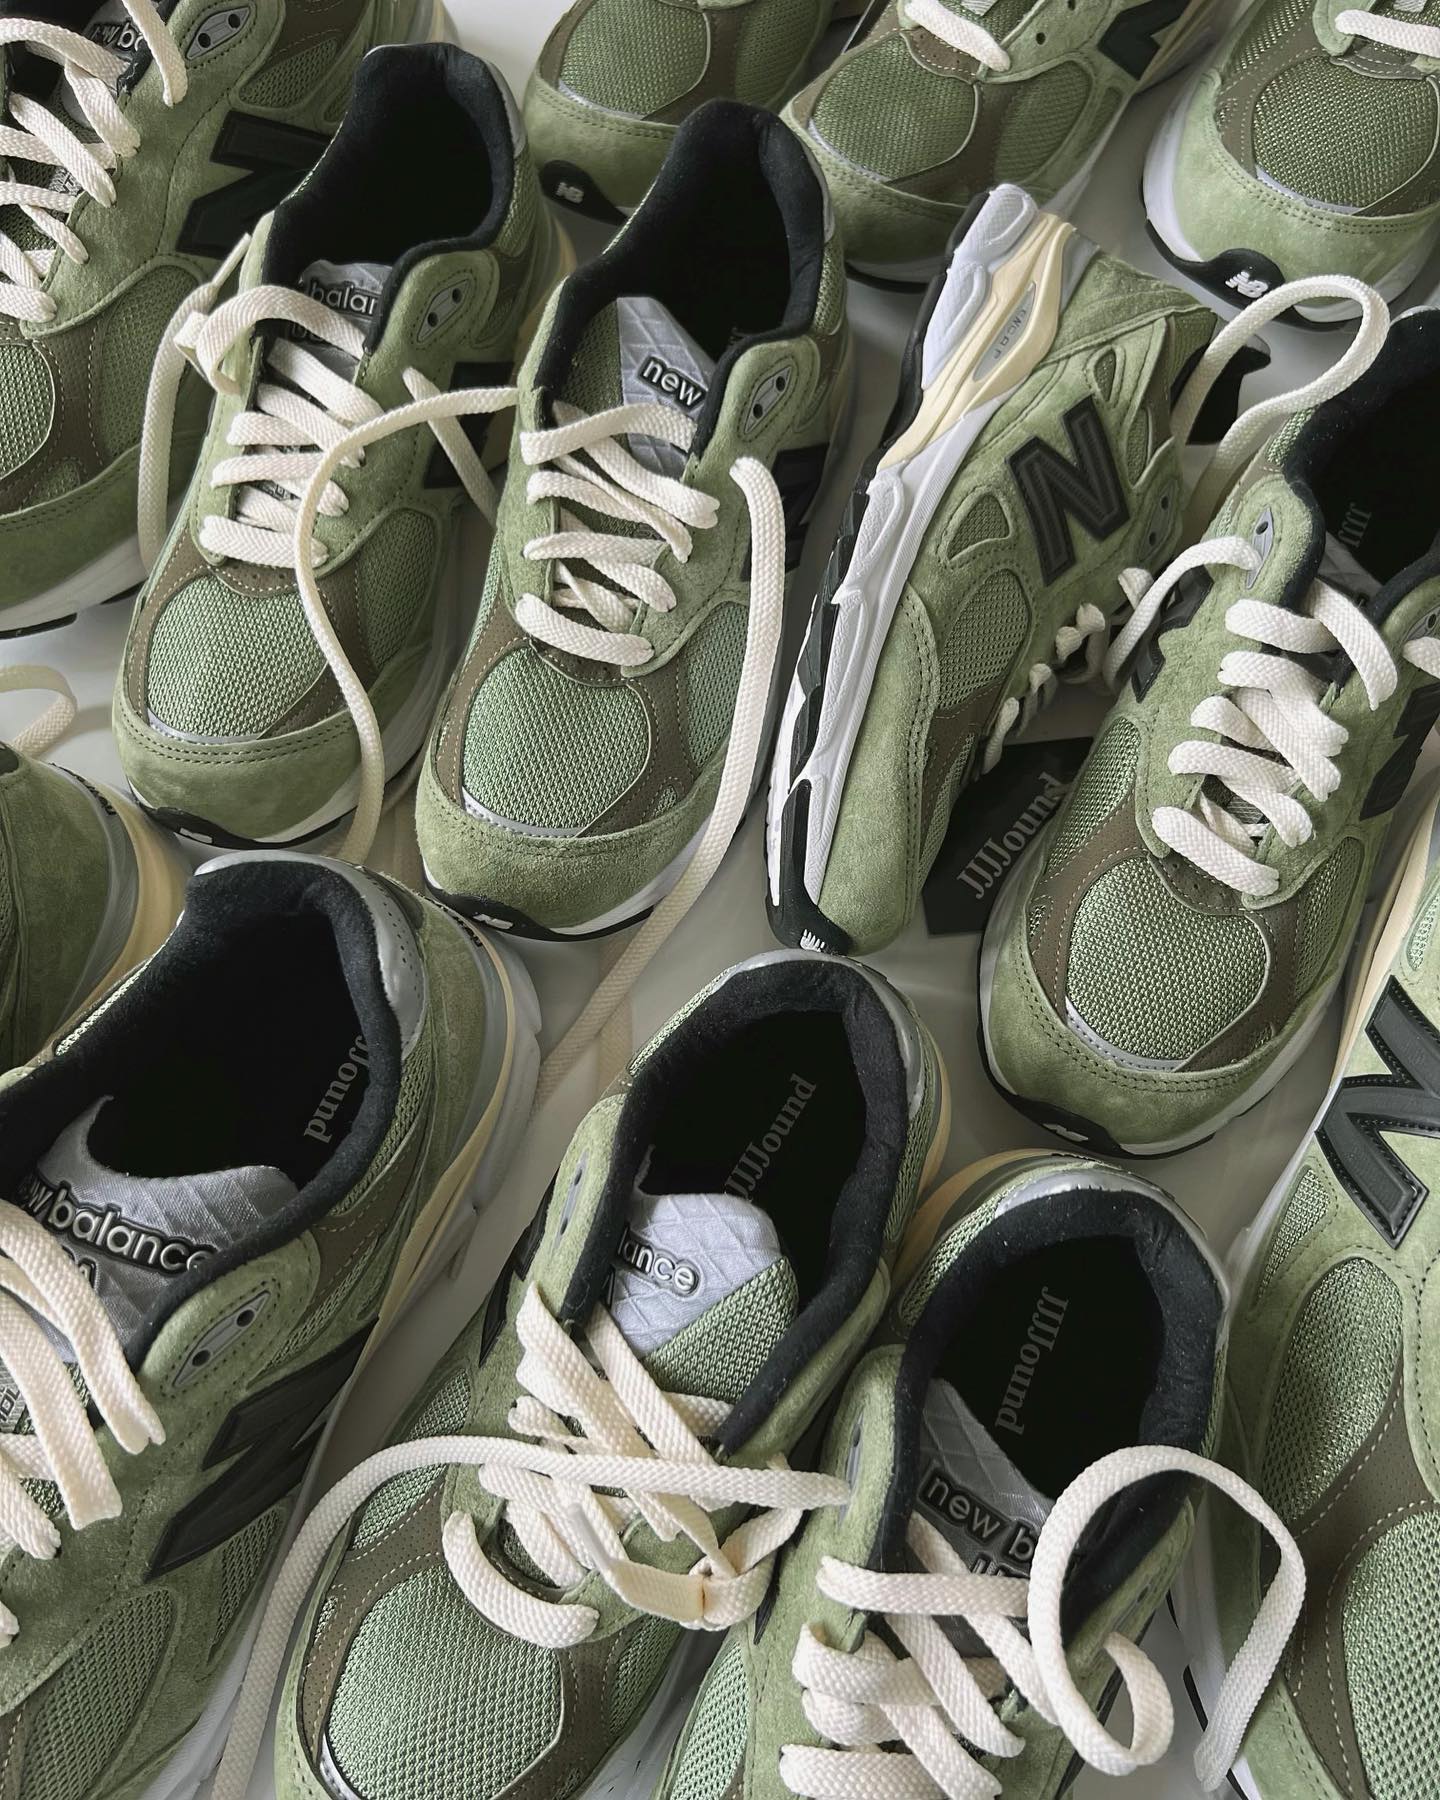 'Olive' Balance 990v3 Collab Is Releasing Week Complex